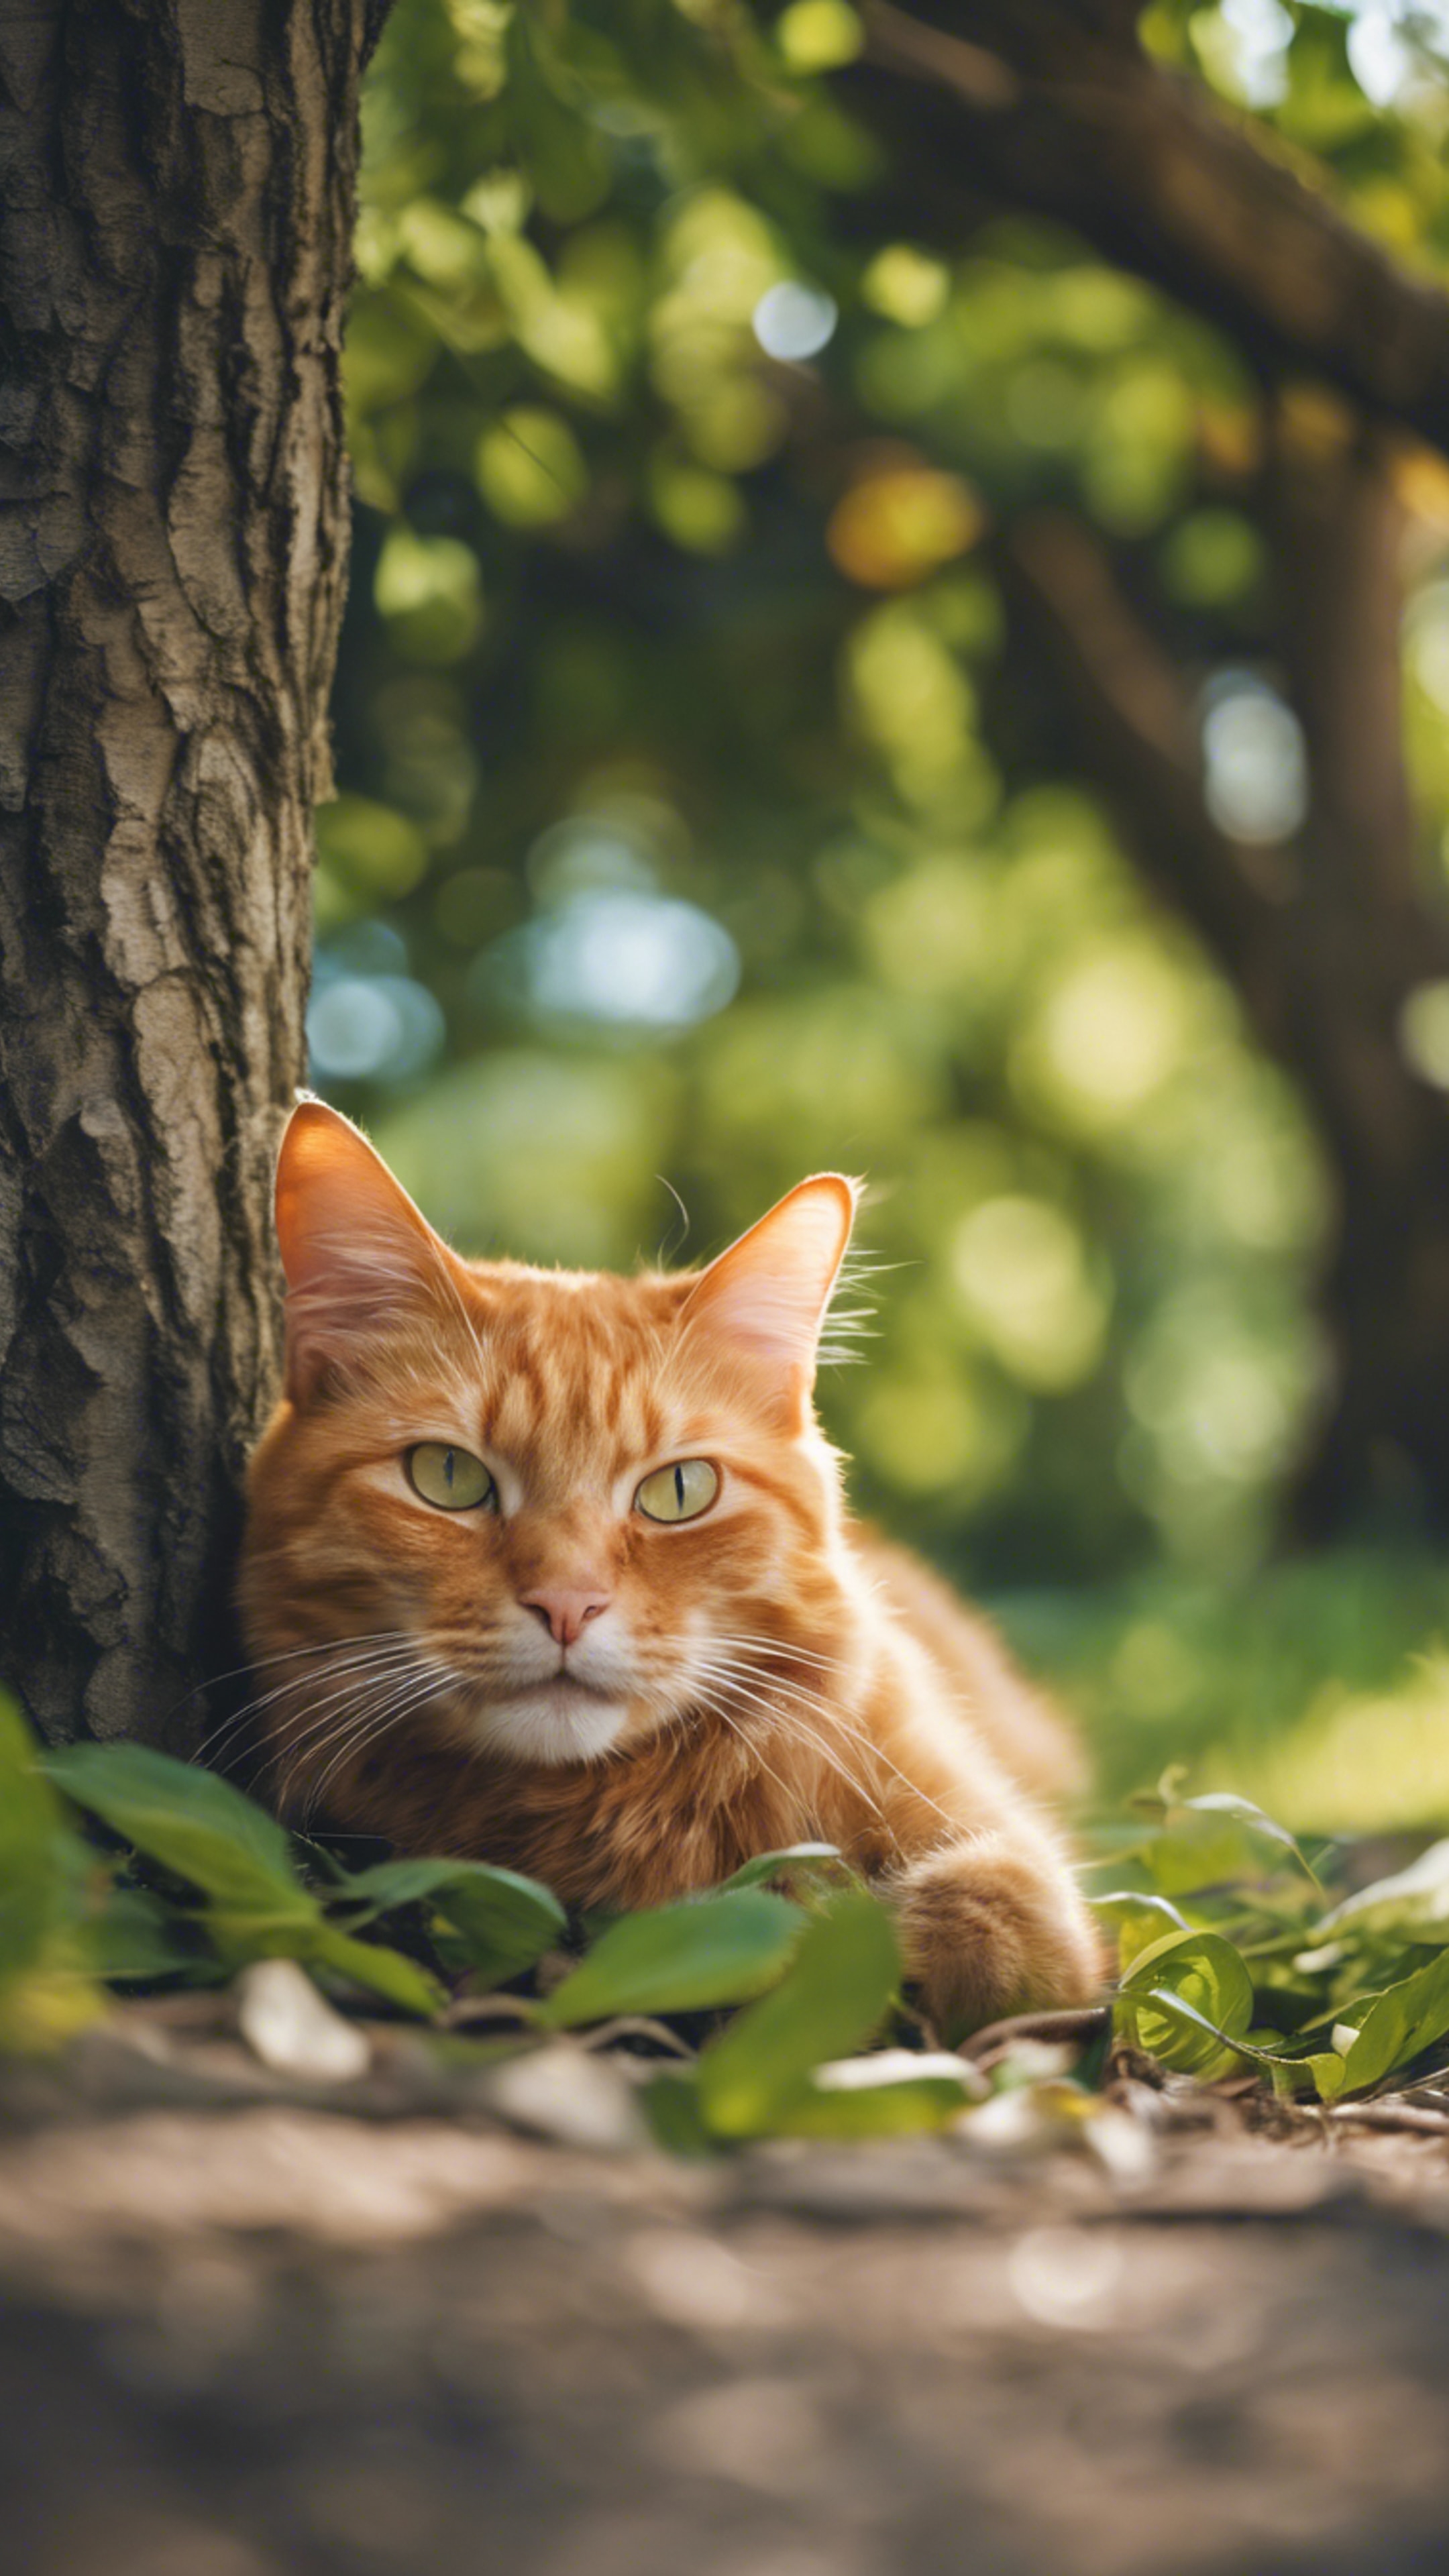 A joyful ginger cat lying lazily under the shade of a leafy tree in summer. Papel de parede[fe7498257623414eab2e]